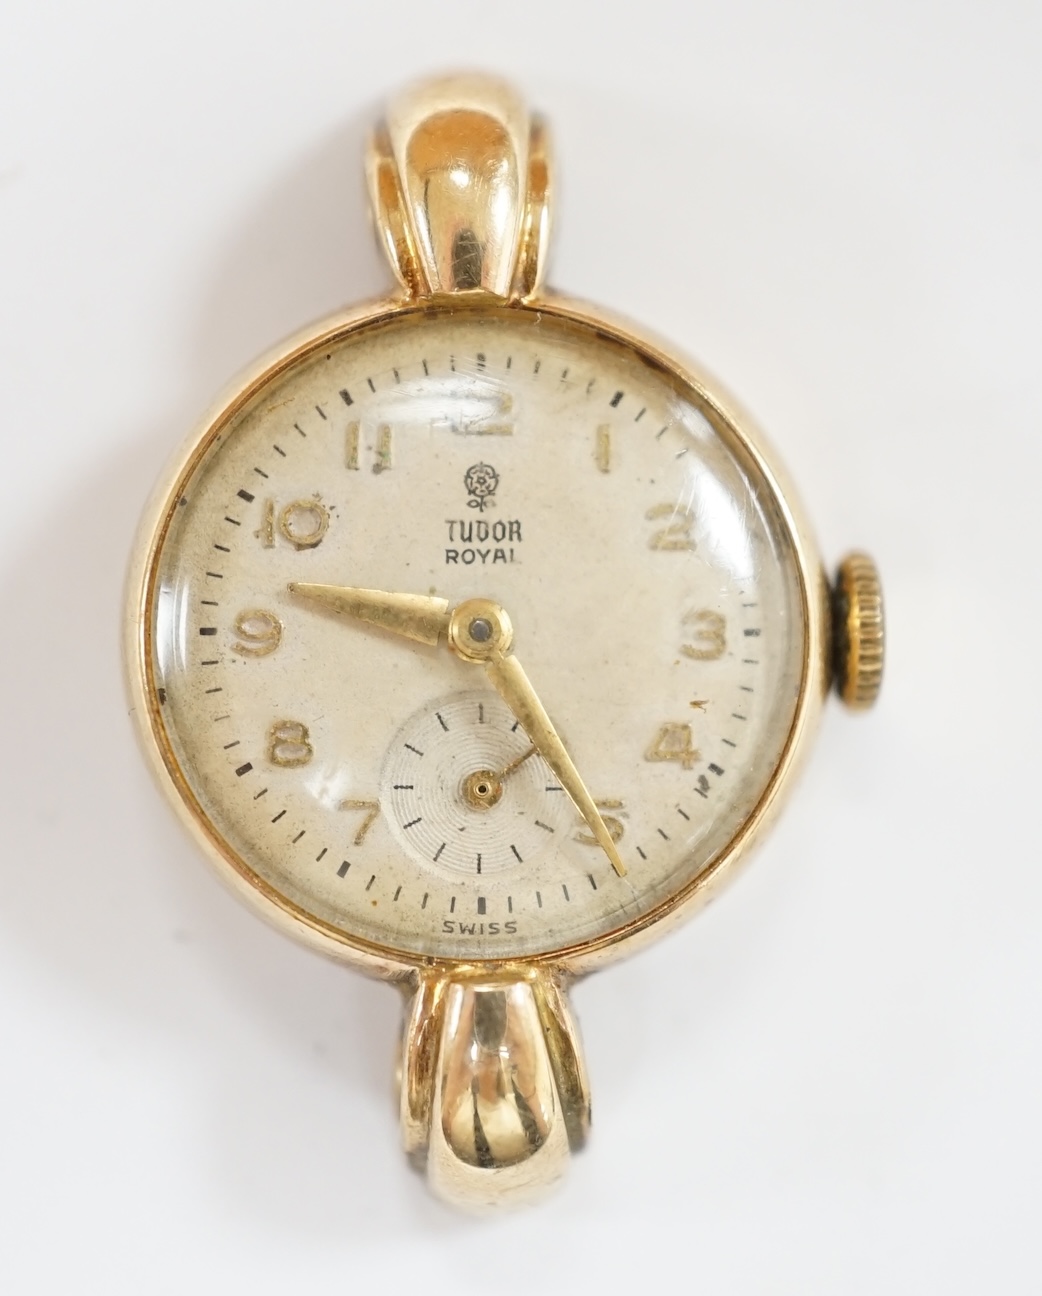 A lady's 9ct gold Tudor Royal manual wind wrist watch, no bracelet. Condition - poor